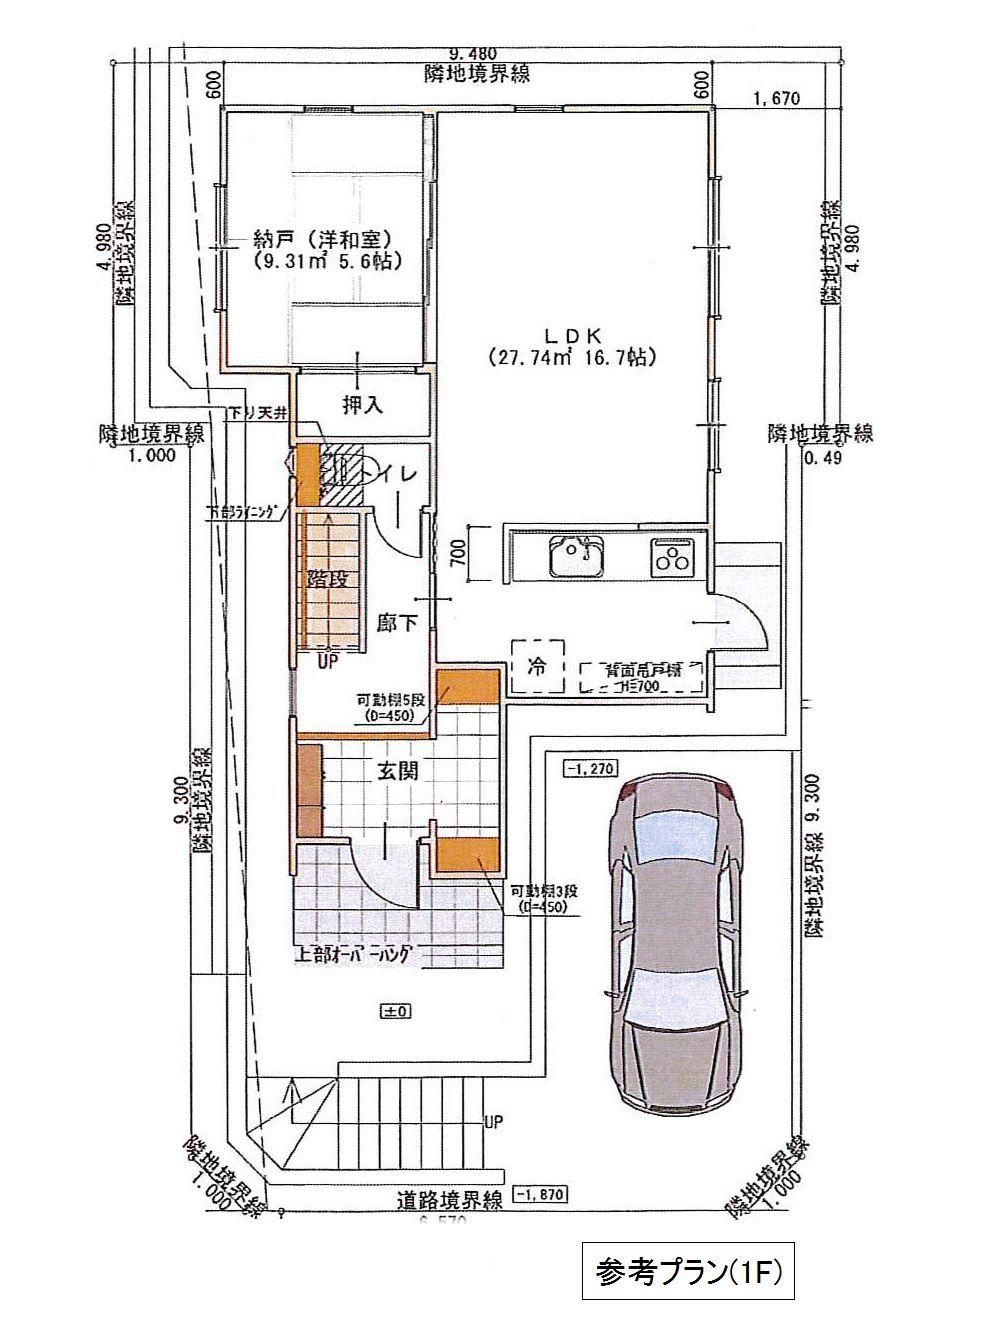 Building plan example (floor plan). Architecture Reference Plan (1F)